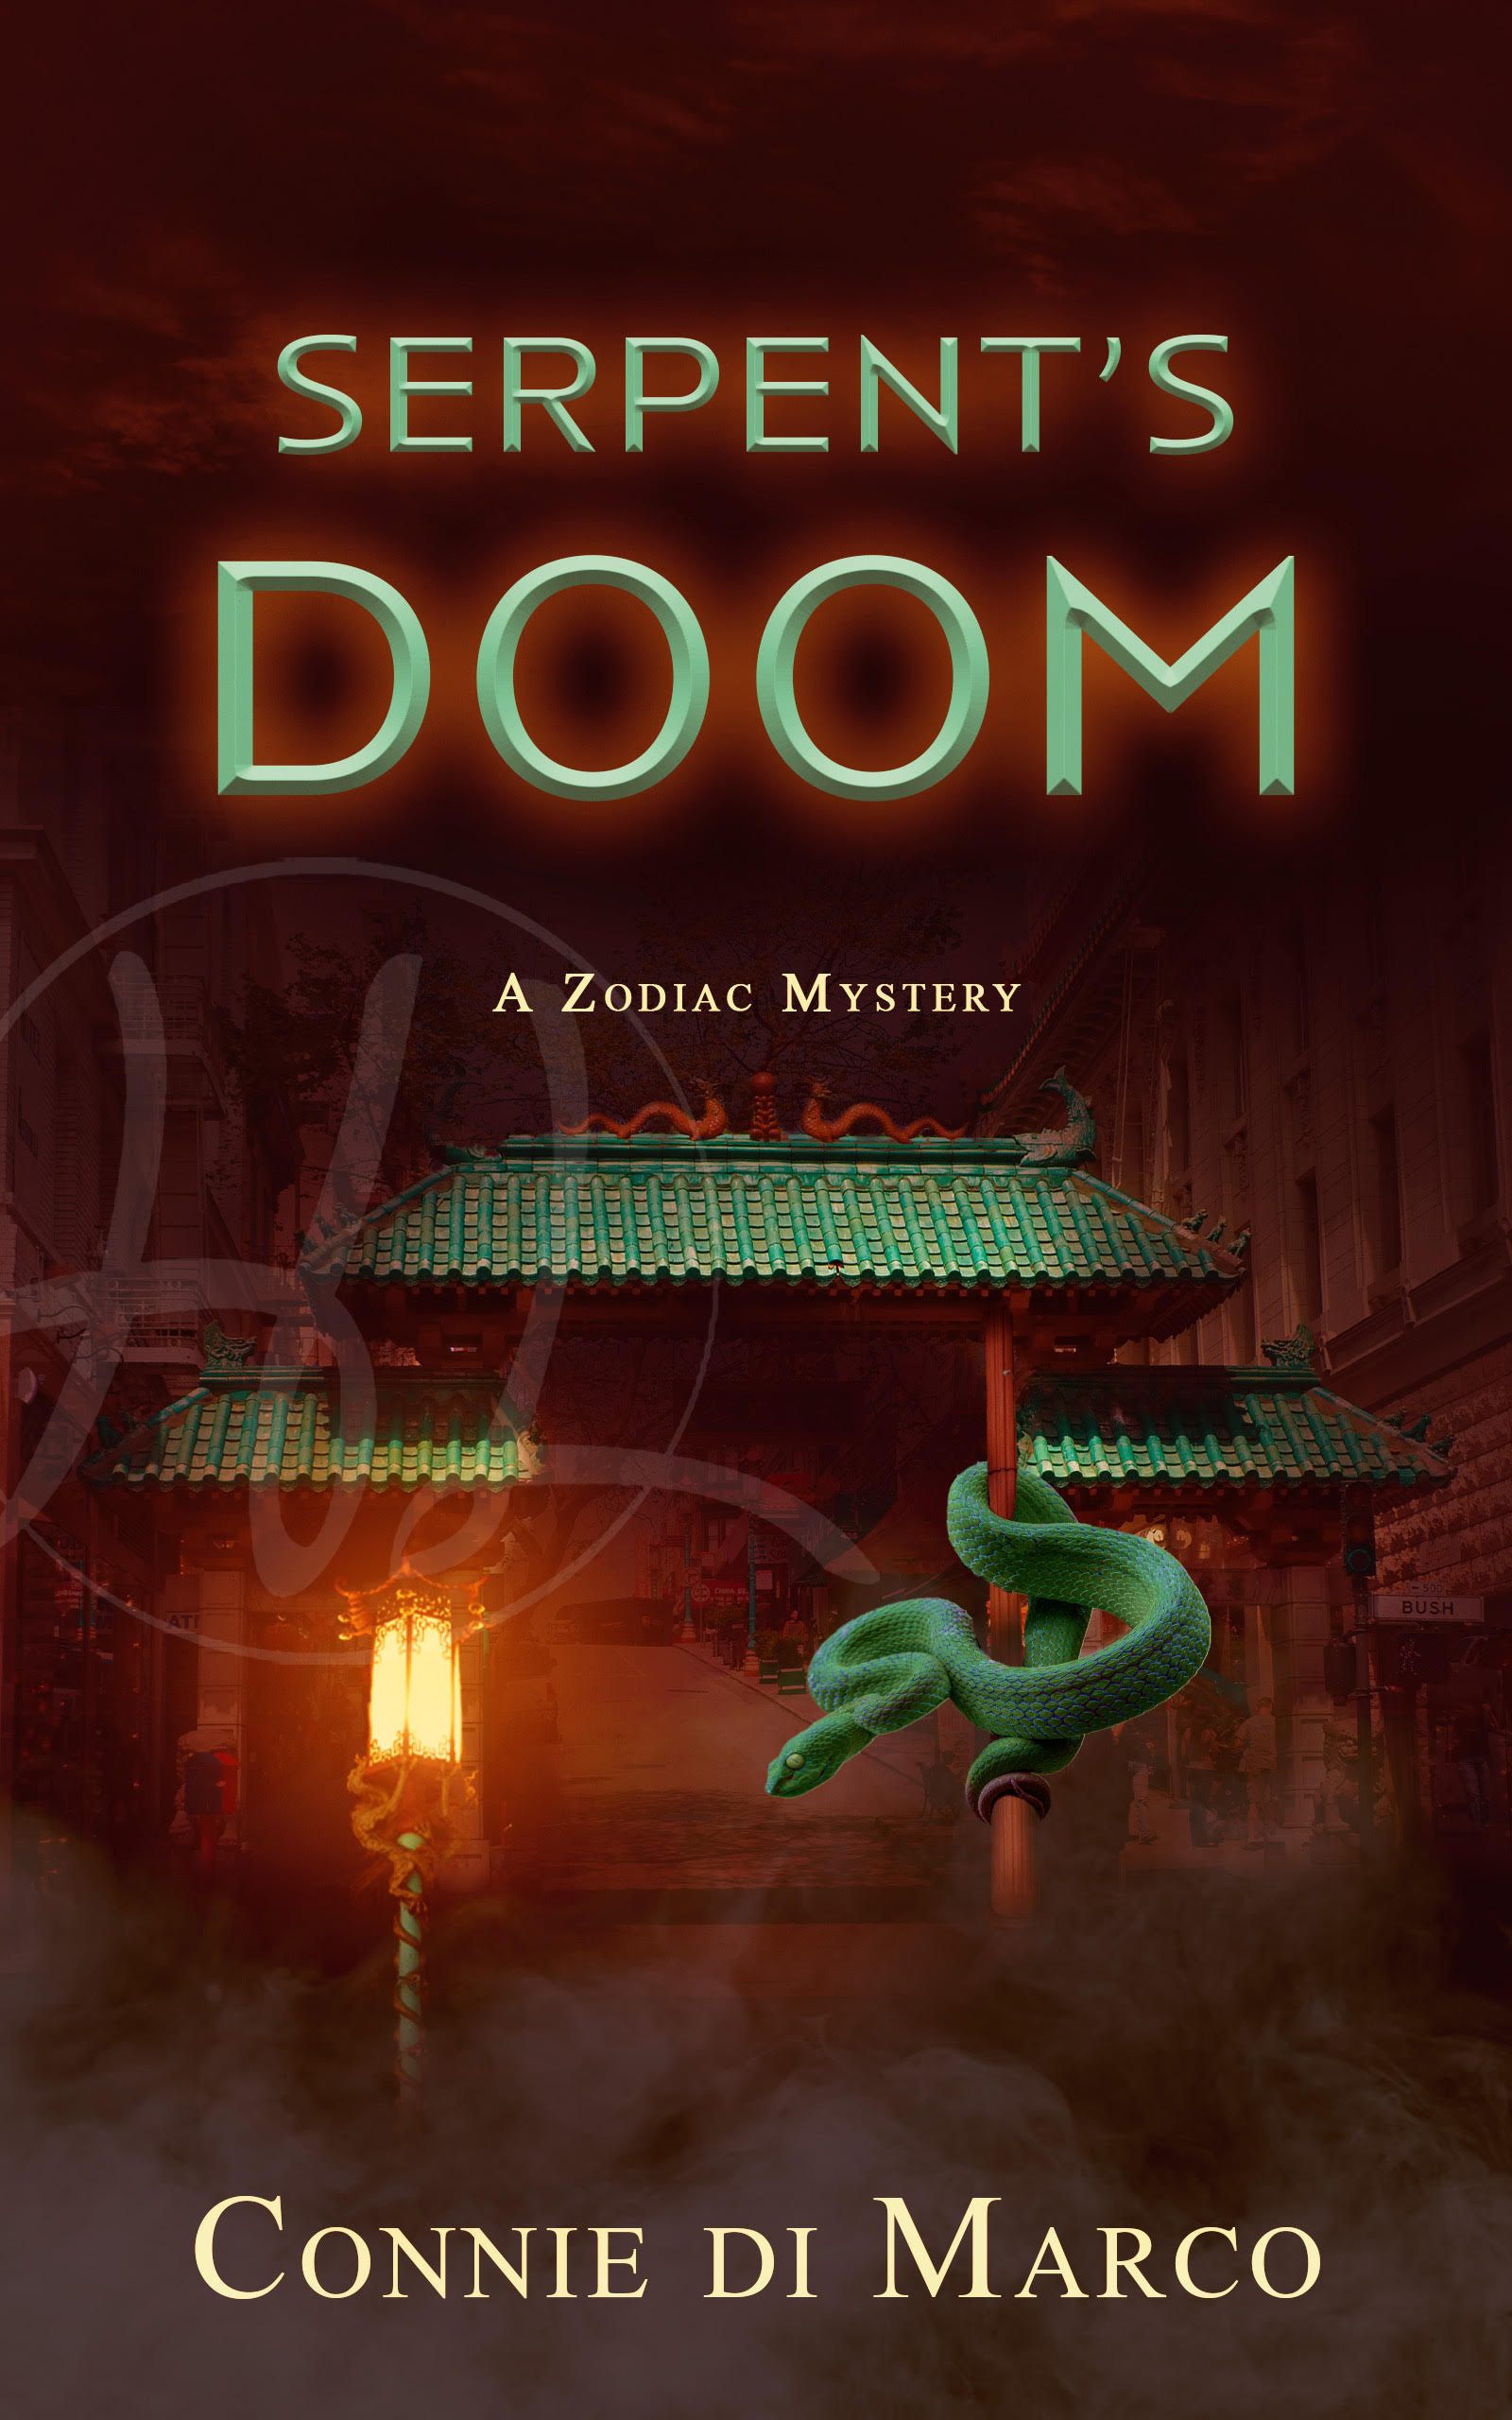 Serpent's Doom by Connie di Marco